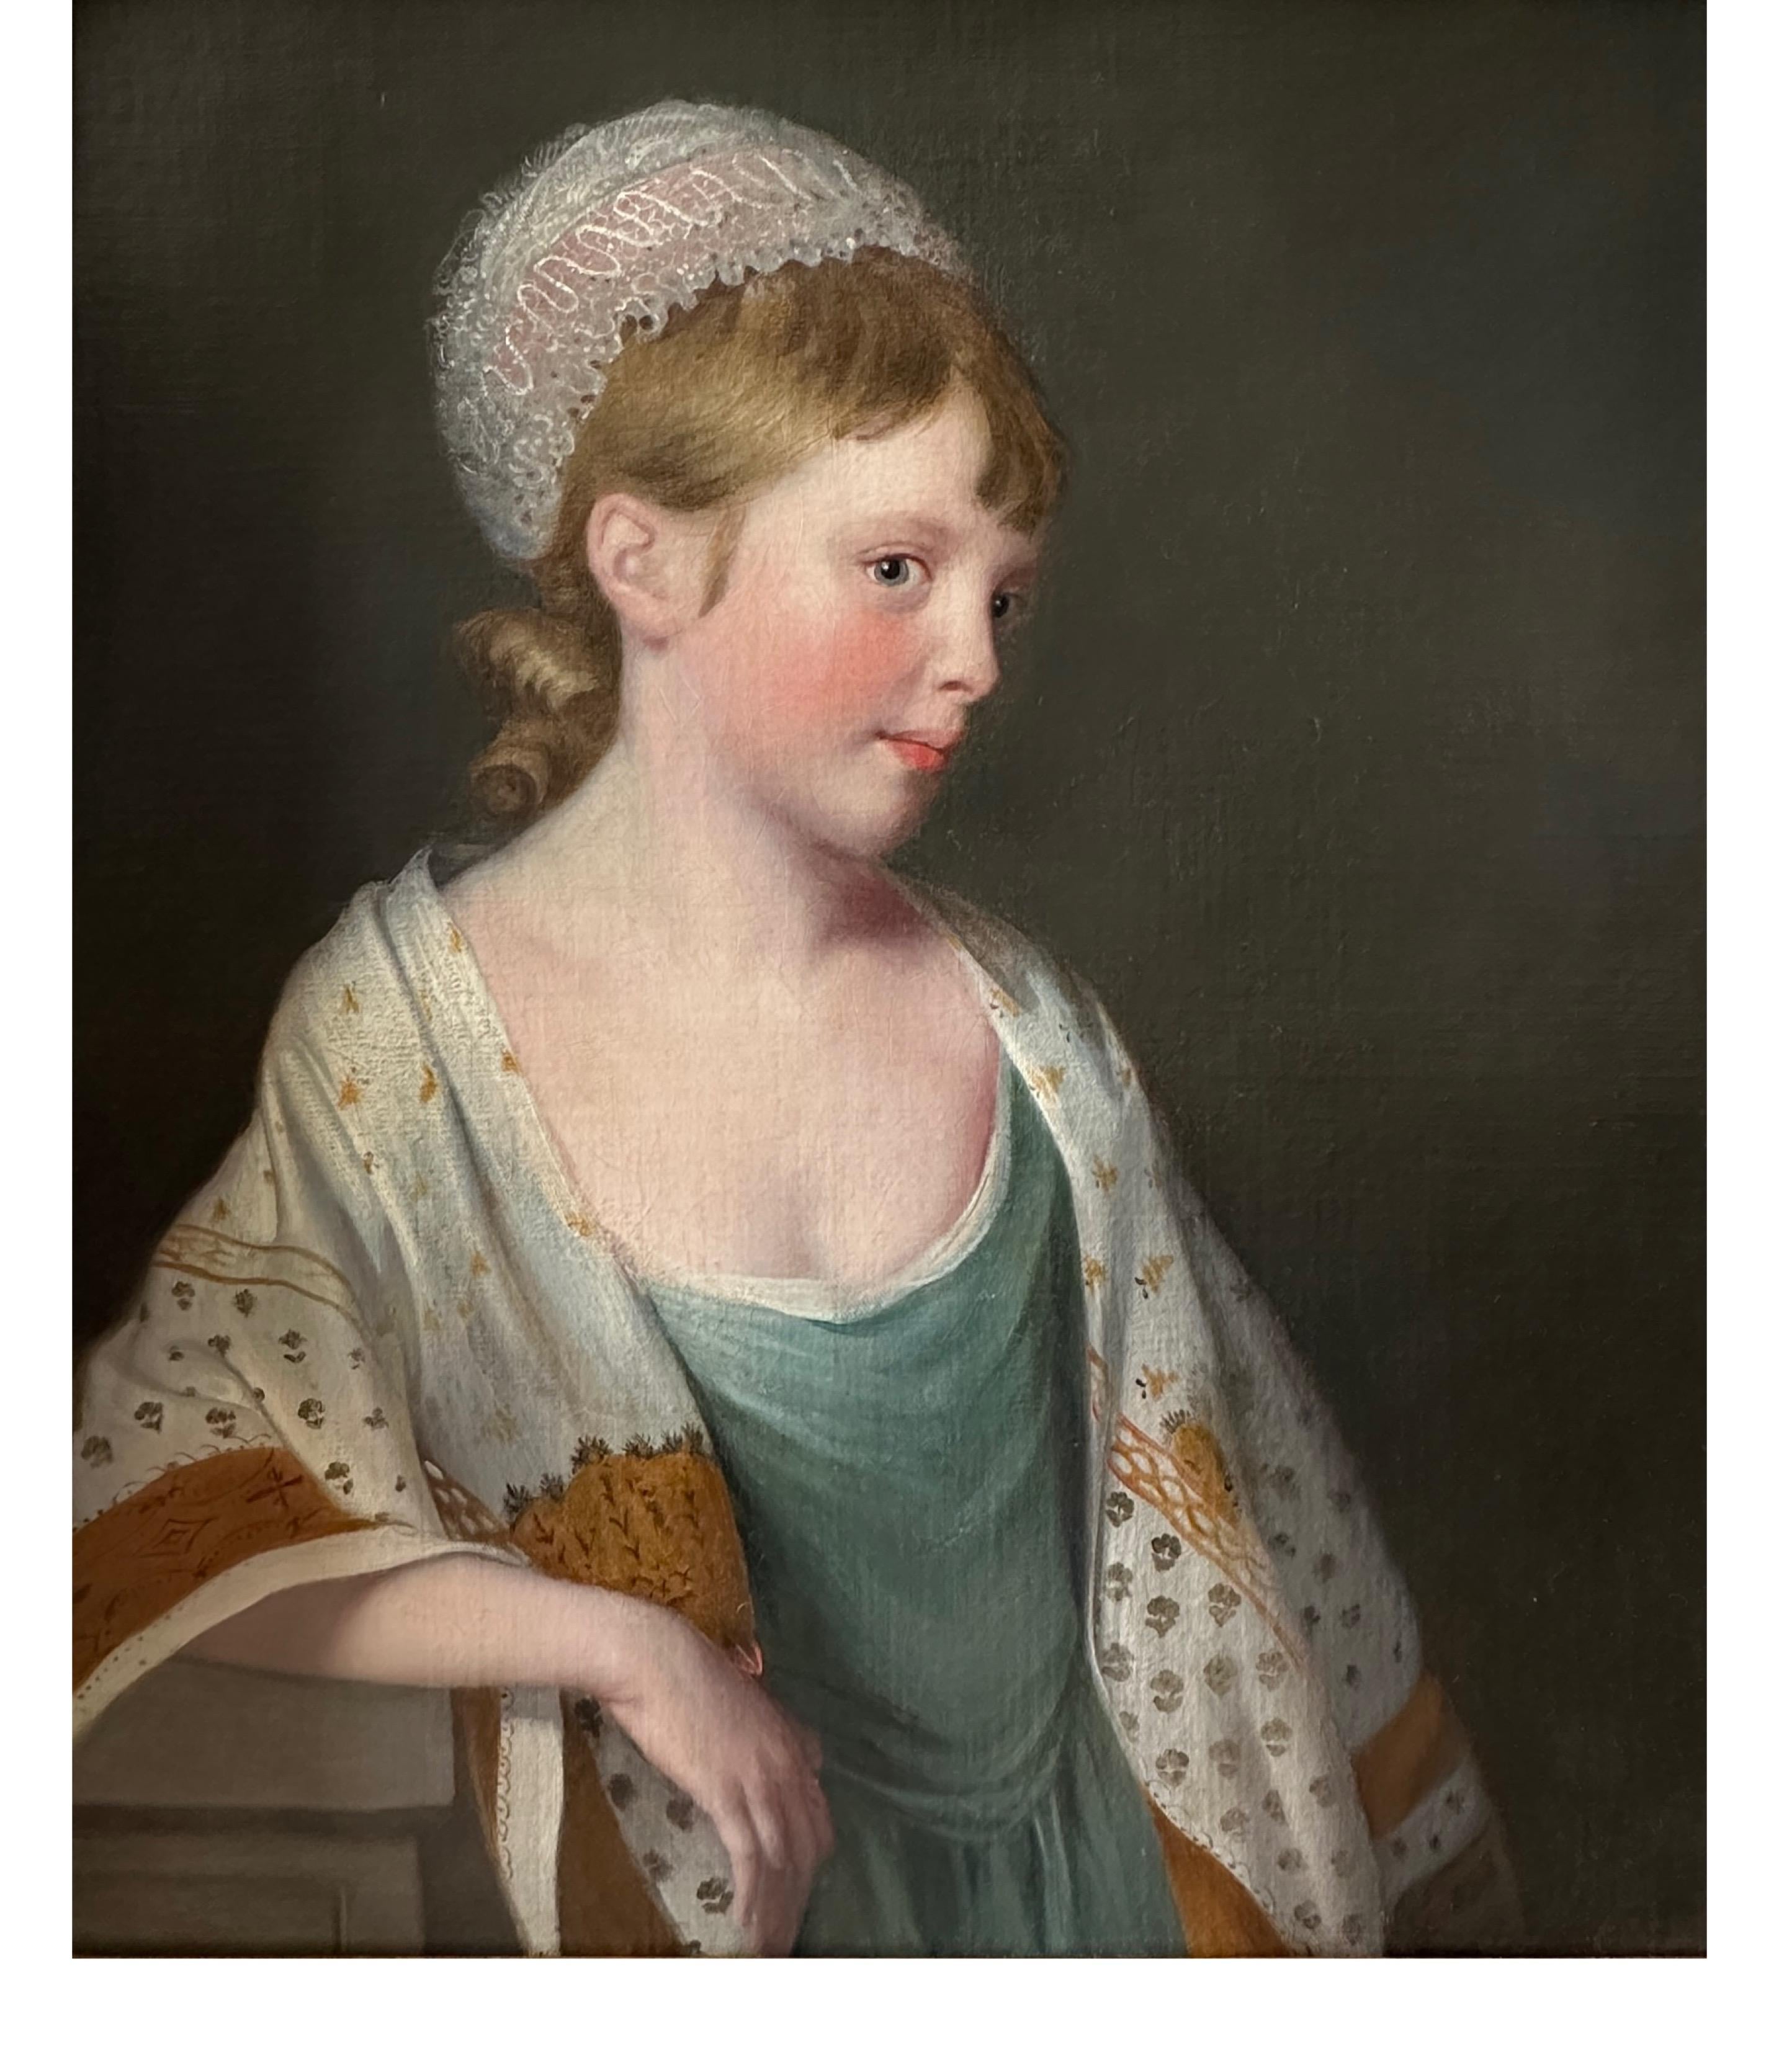 18th century portrait of a young girl in a bonnet and patterned shawl - Painting by Tilly Kettle